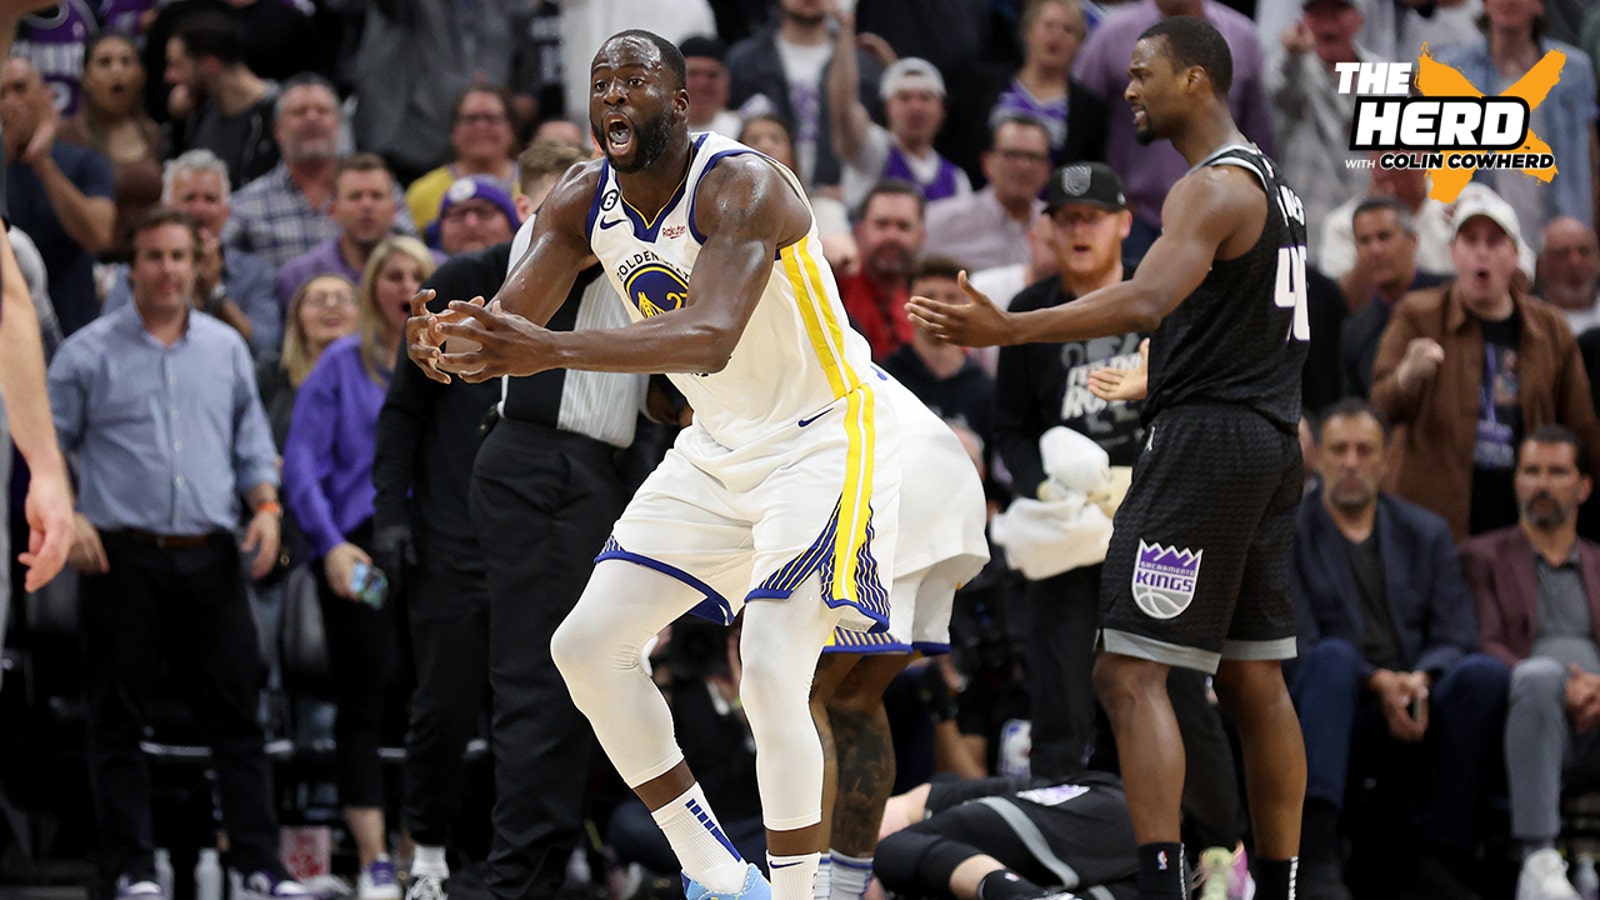 How Draymond Green's crowd antics affected suspension decision